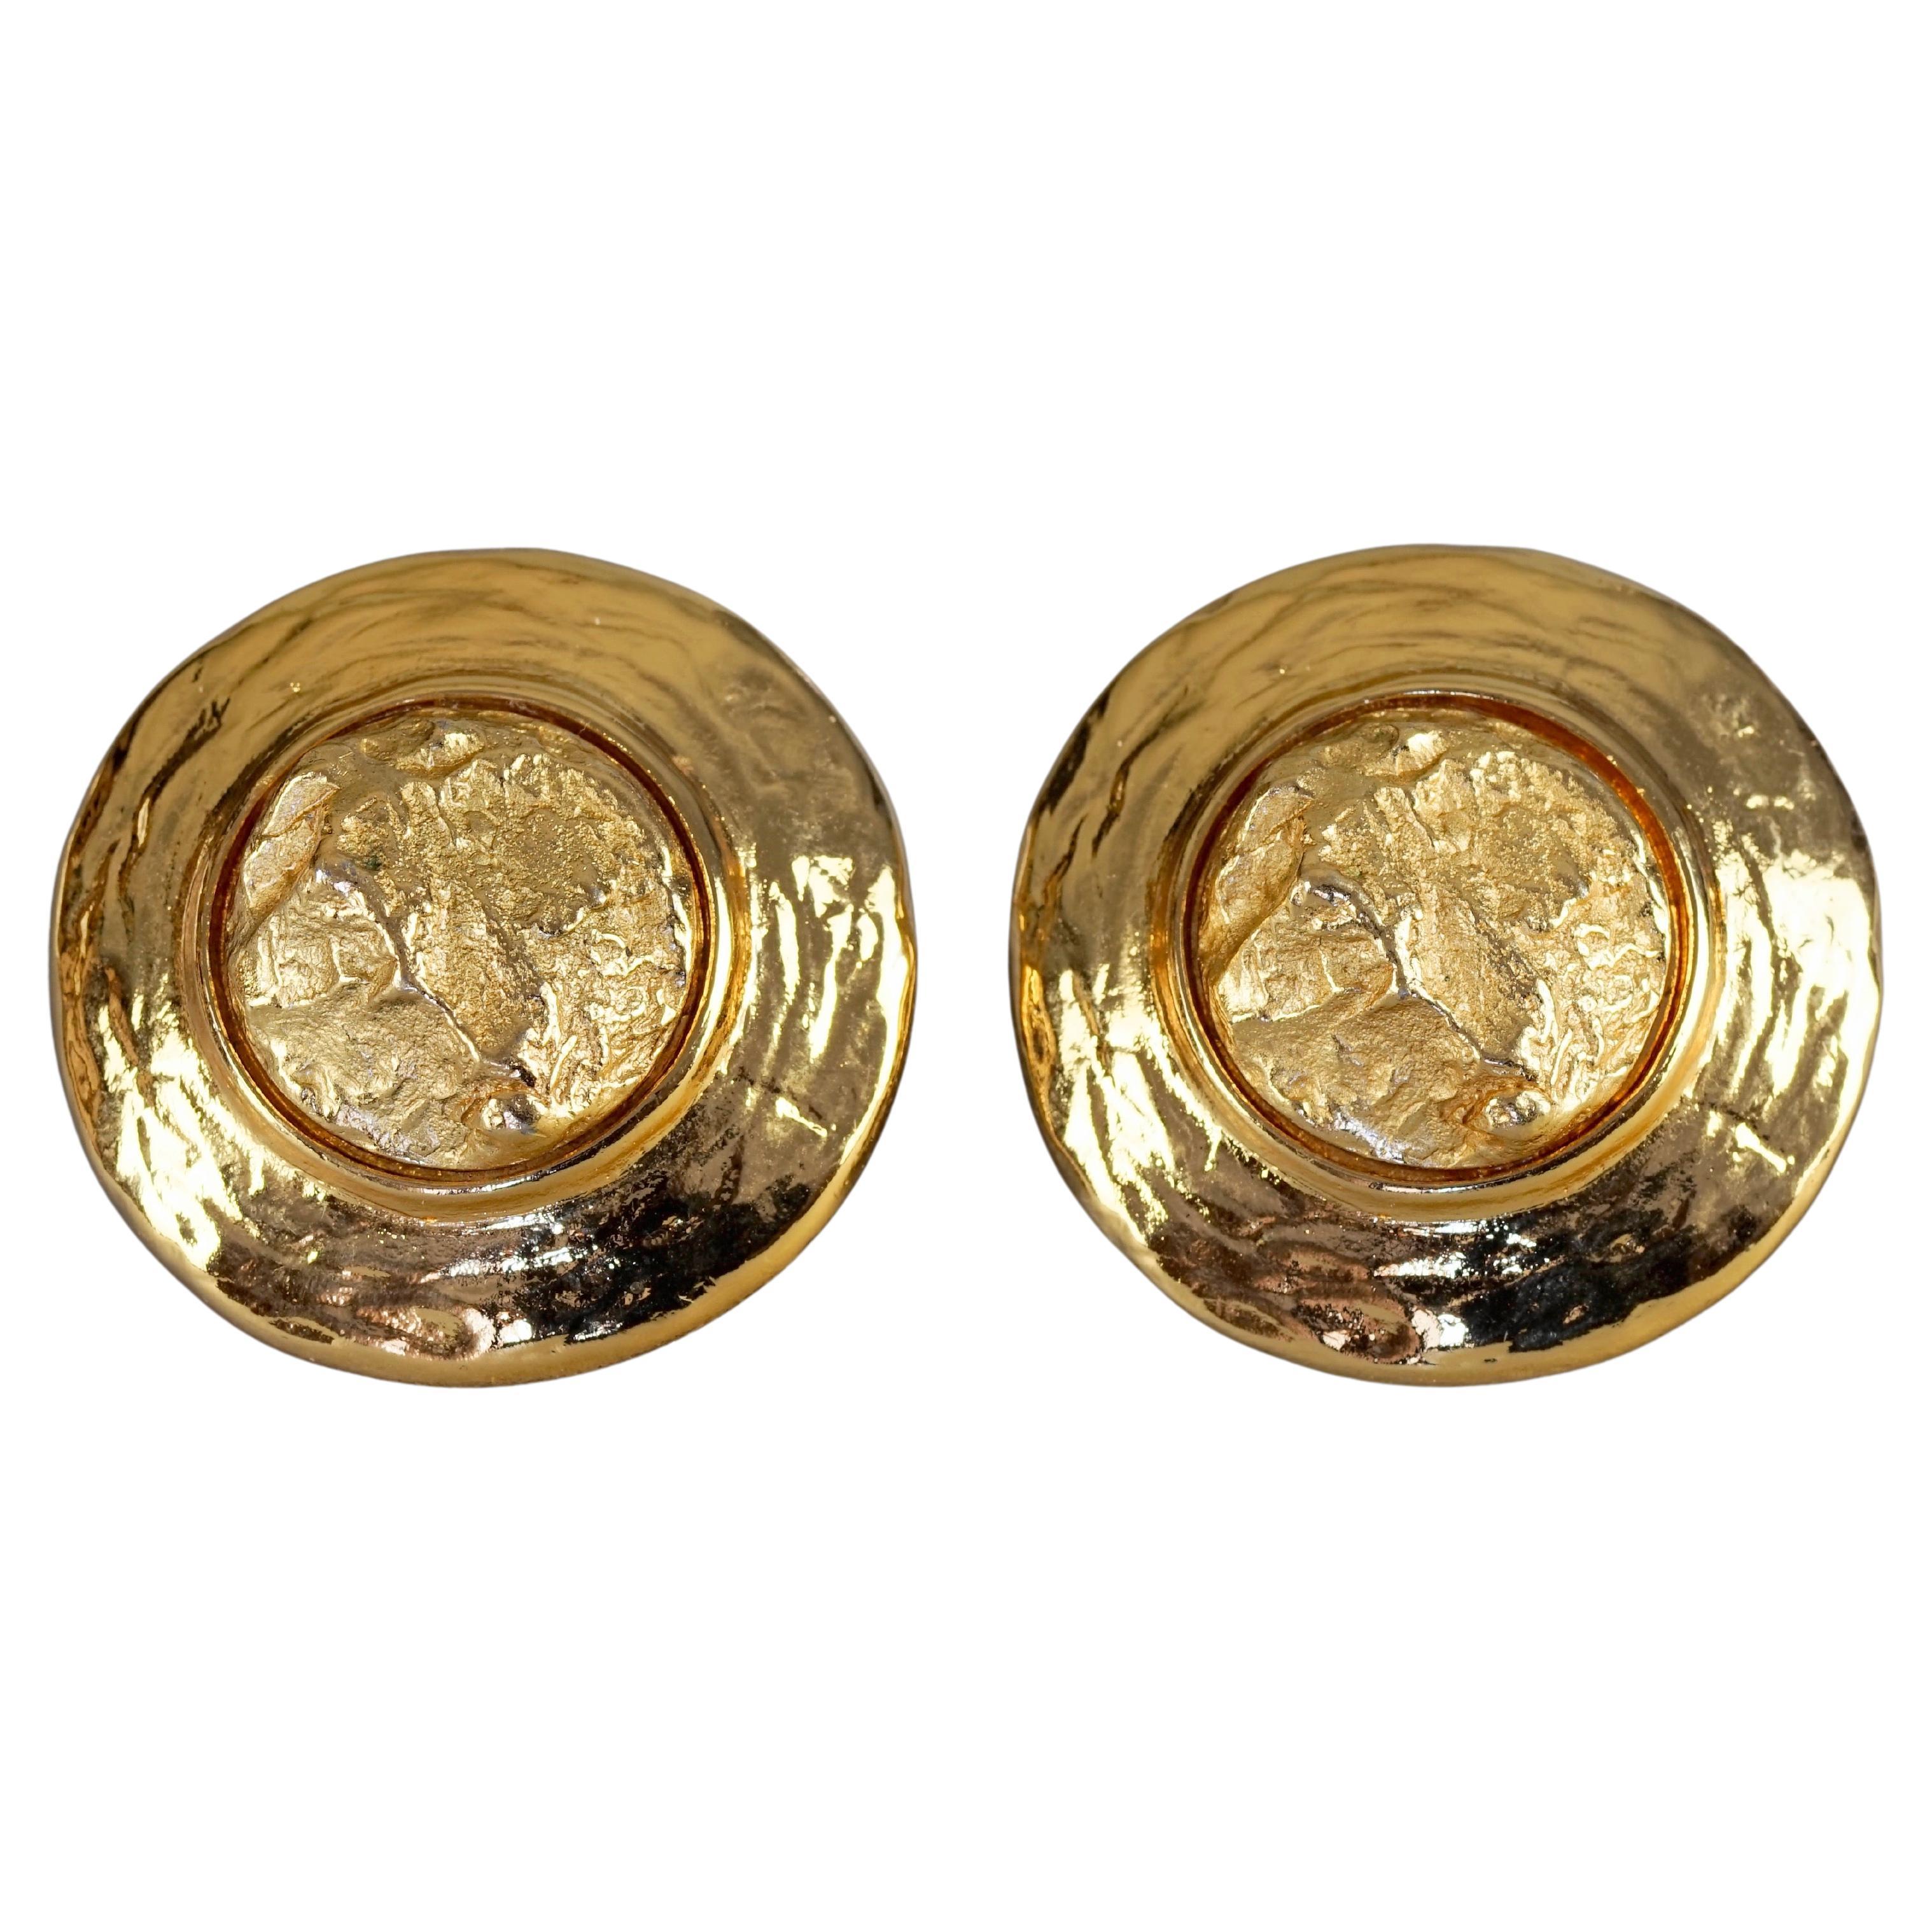 Vintage YVES SAINT LAURENT Ysl Textured Gold Round Earrings For Sale